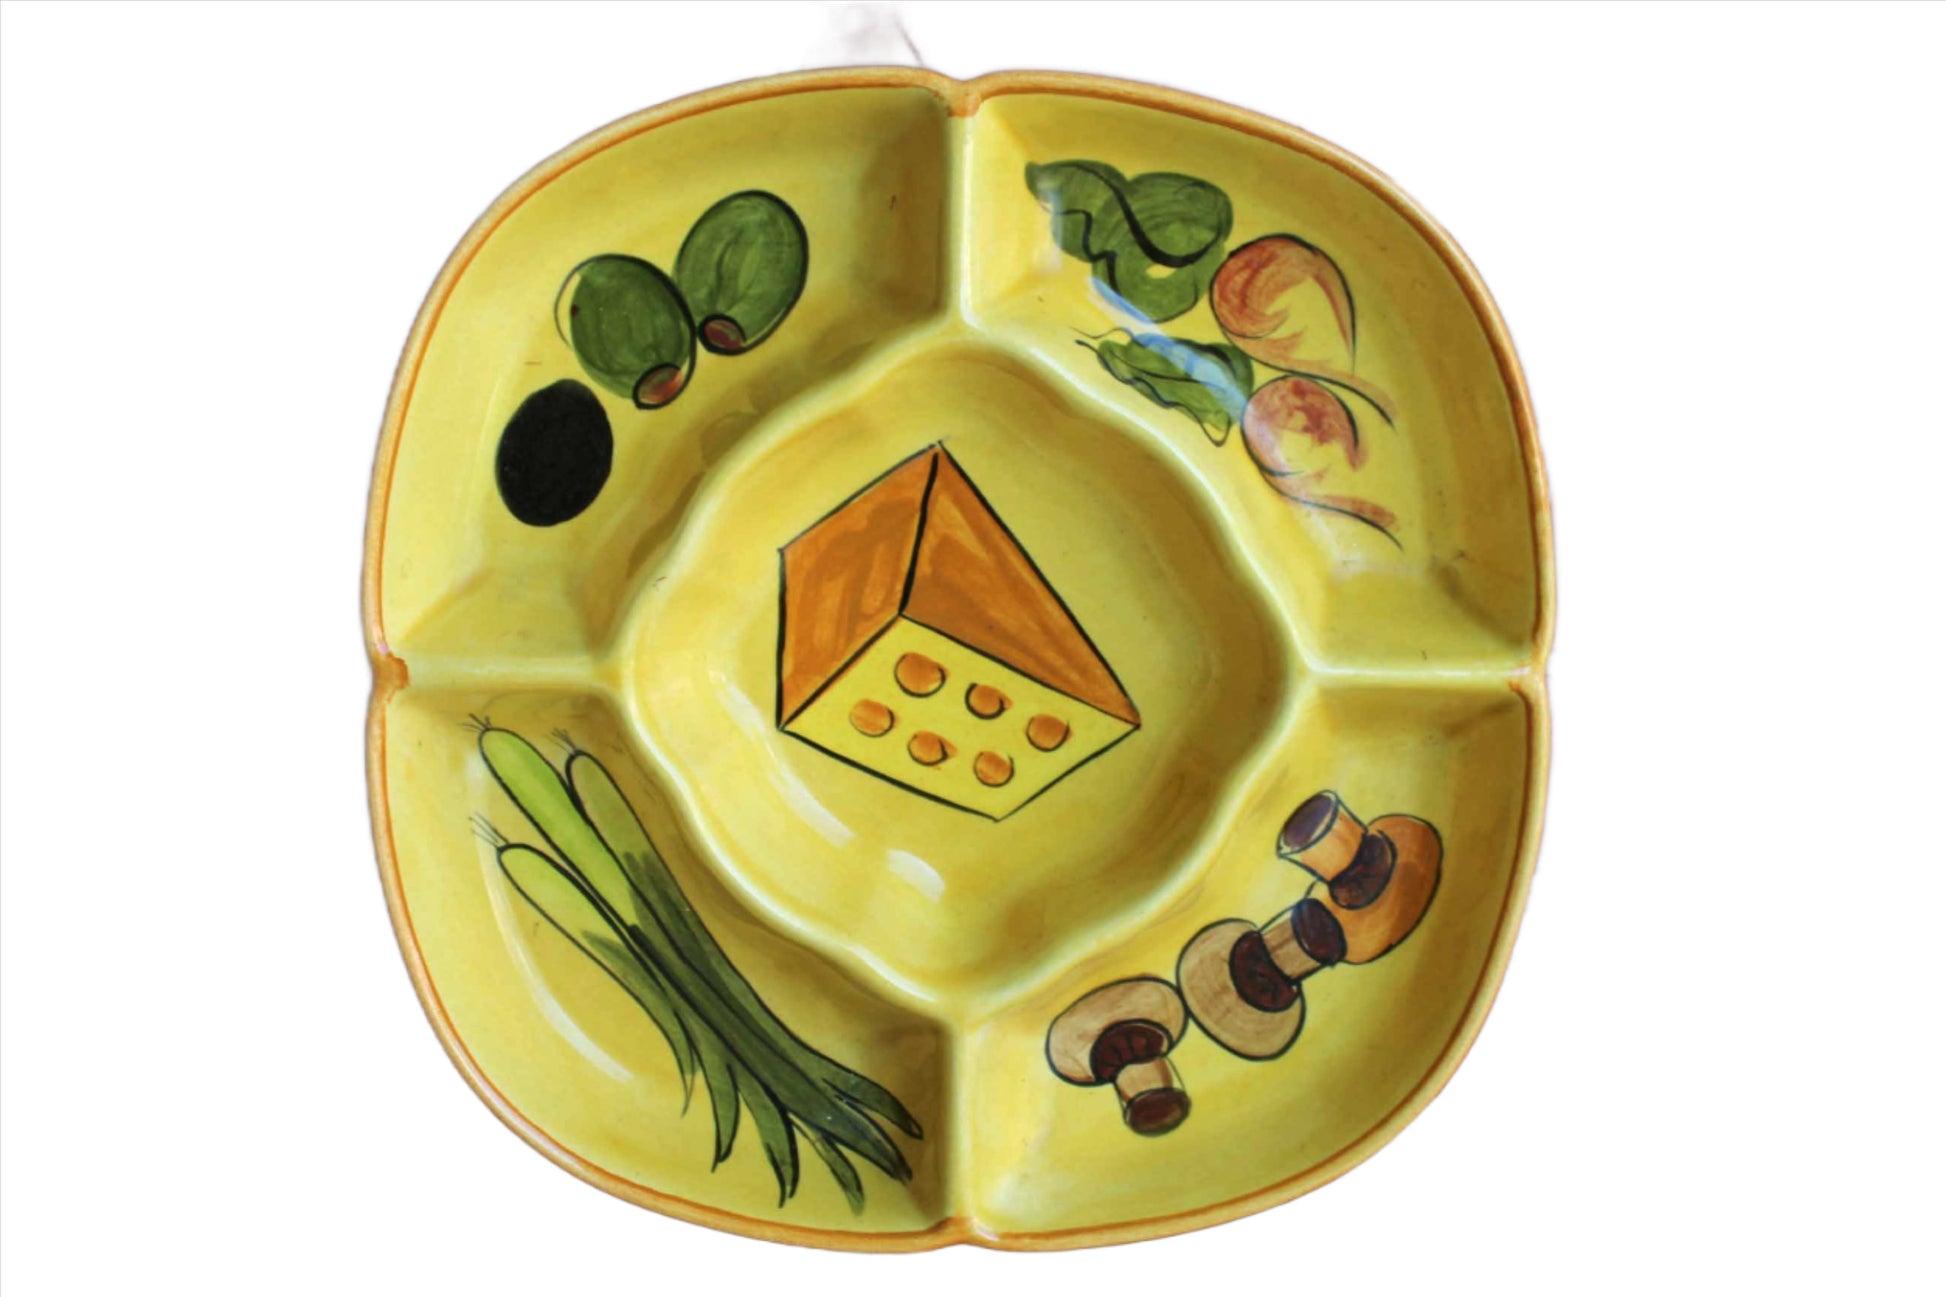 A 1970 crudité serving platter from Los Angeles Potteries featuring five serving compartments decorated with paintings of cheese, olives, green onions, carrots and mushrooms, all on a vibrant yellow base and finished with painted ochre rim.  The dish measures 12 3/4" across and sits 2" high.  The bottom is marked "copyright 1970 Los Angeles Potteries USA 415."  The condition is very good.